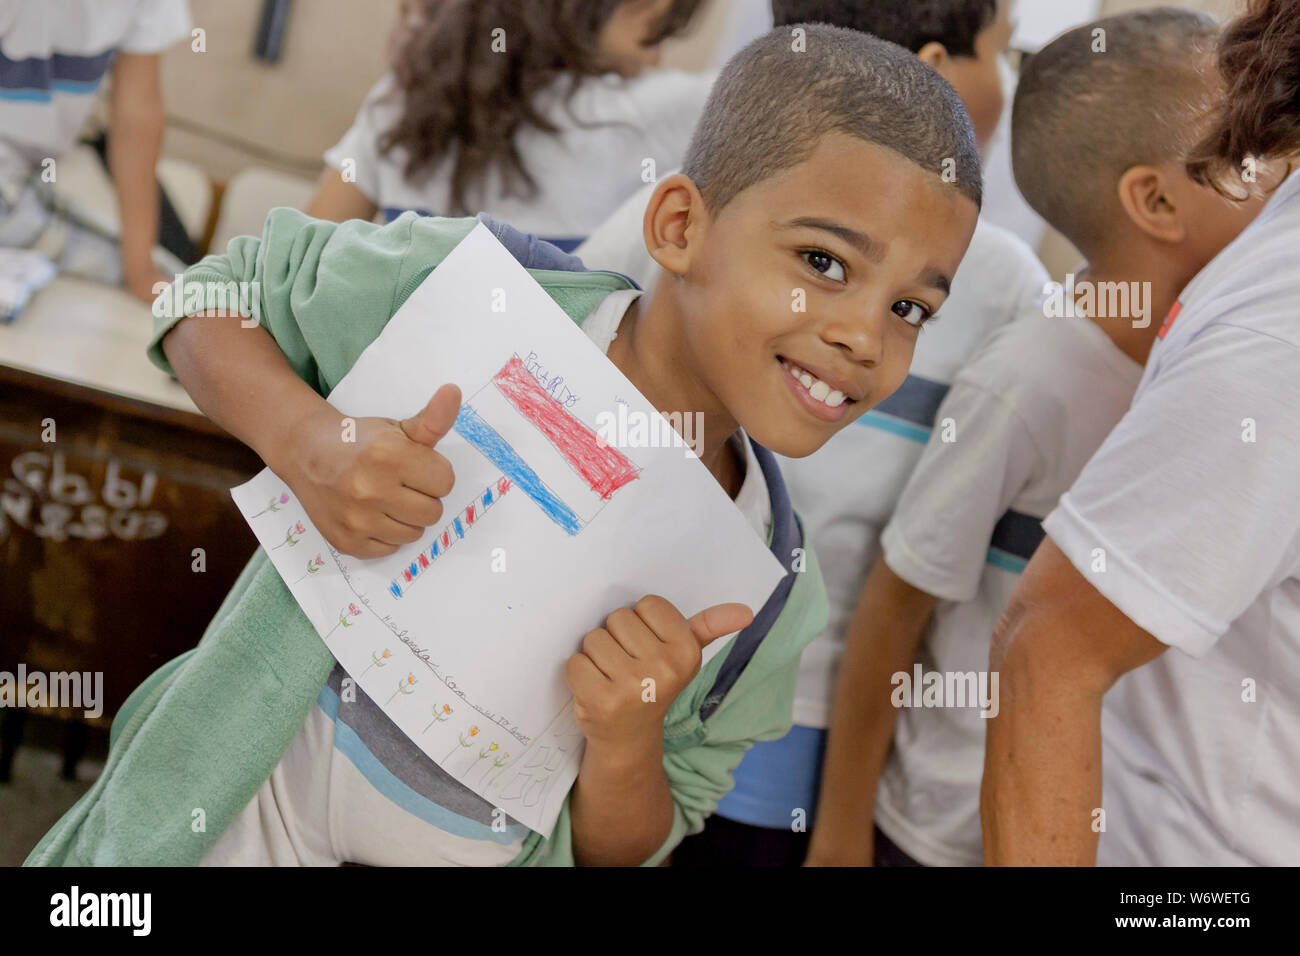 Young Brazilian school boy holding a drawing he made smiling and putting two thumbs up at the camera with his peers in the background Stock Photo